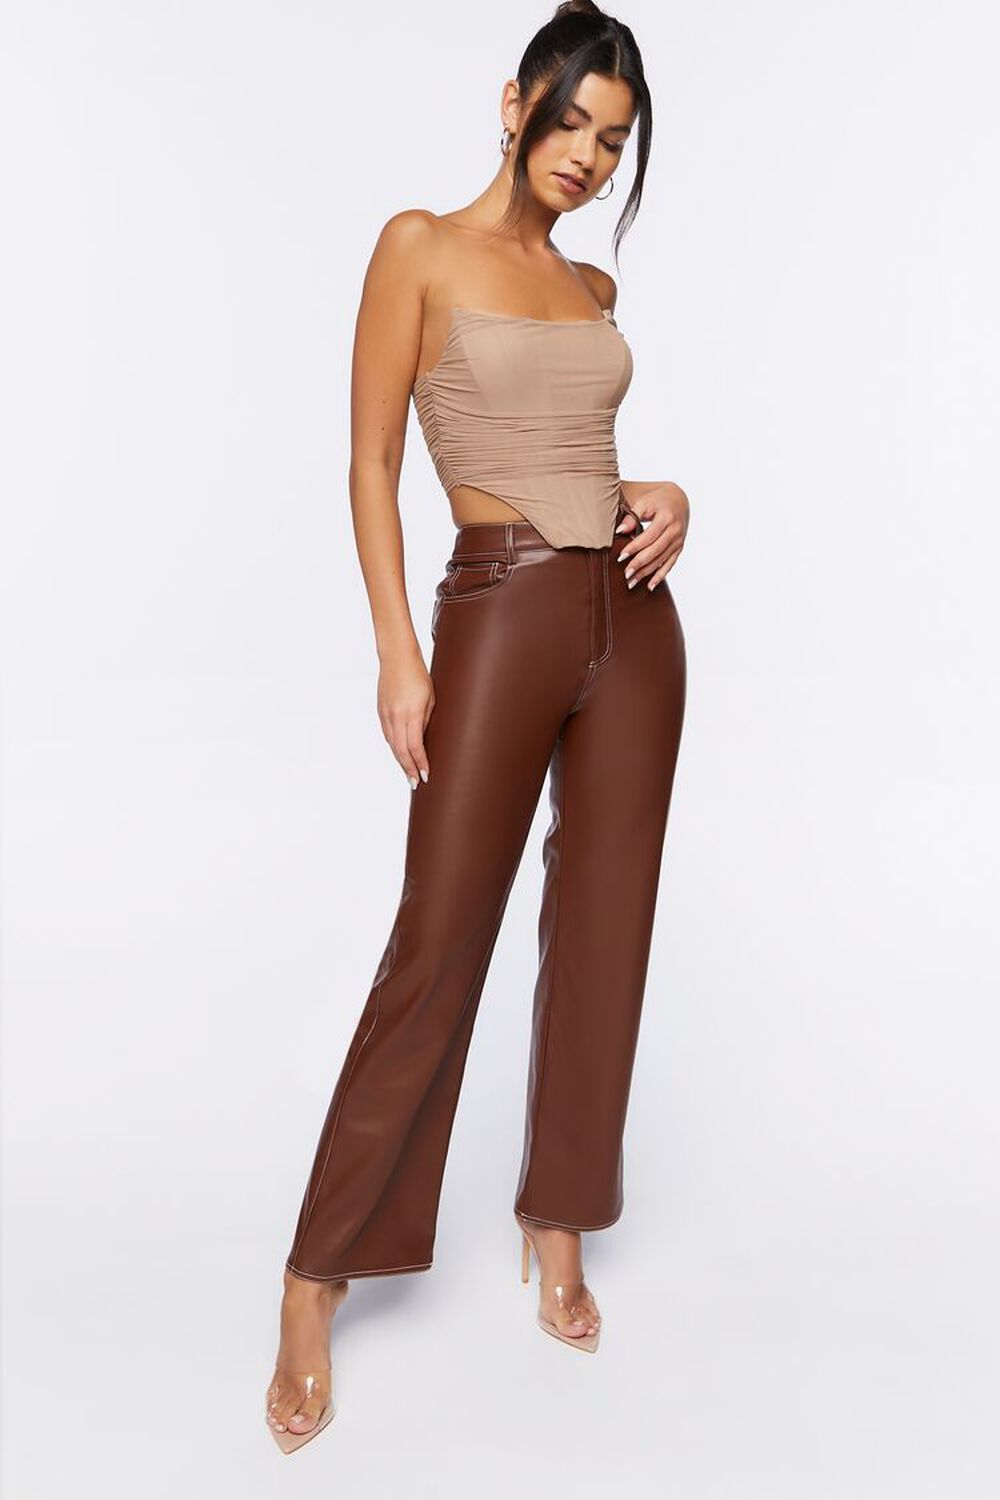 CHOCOLATE Faux Leather Ankle Pants, image 1